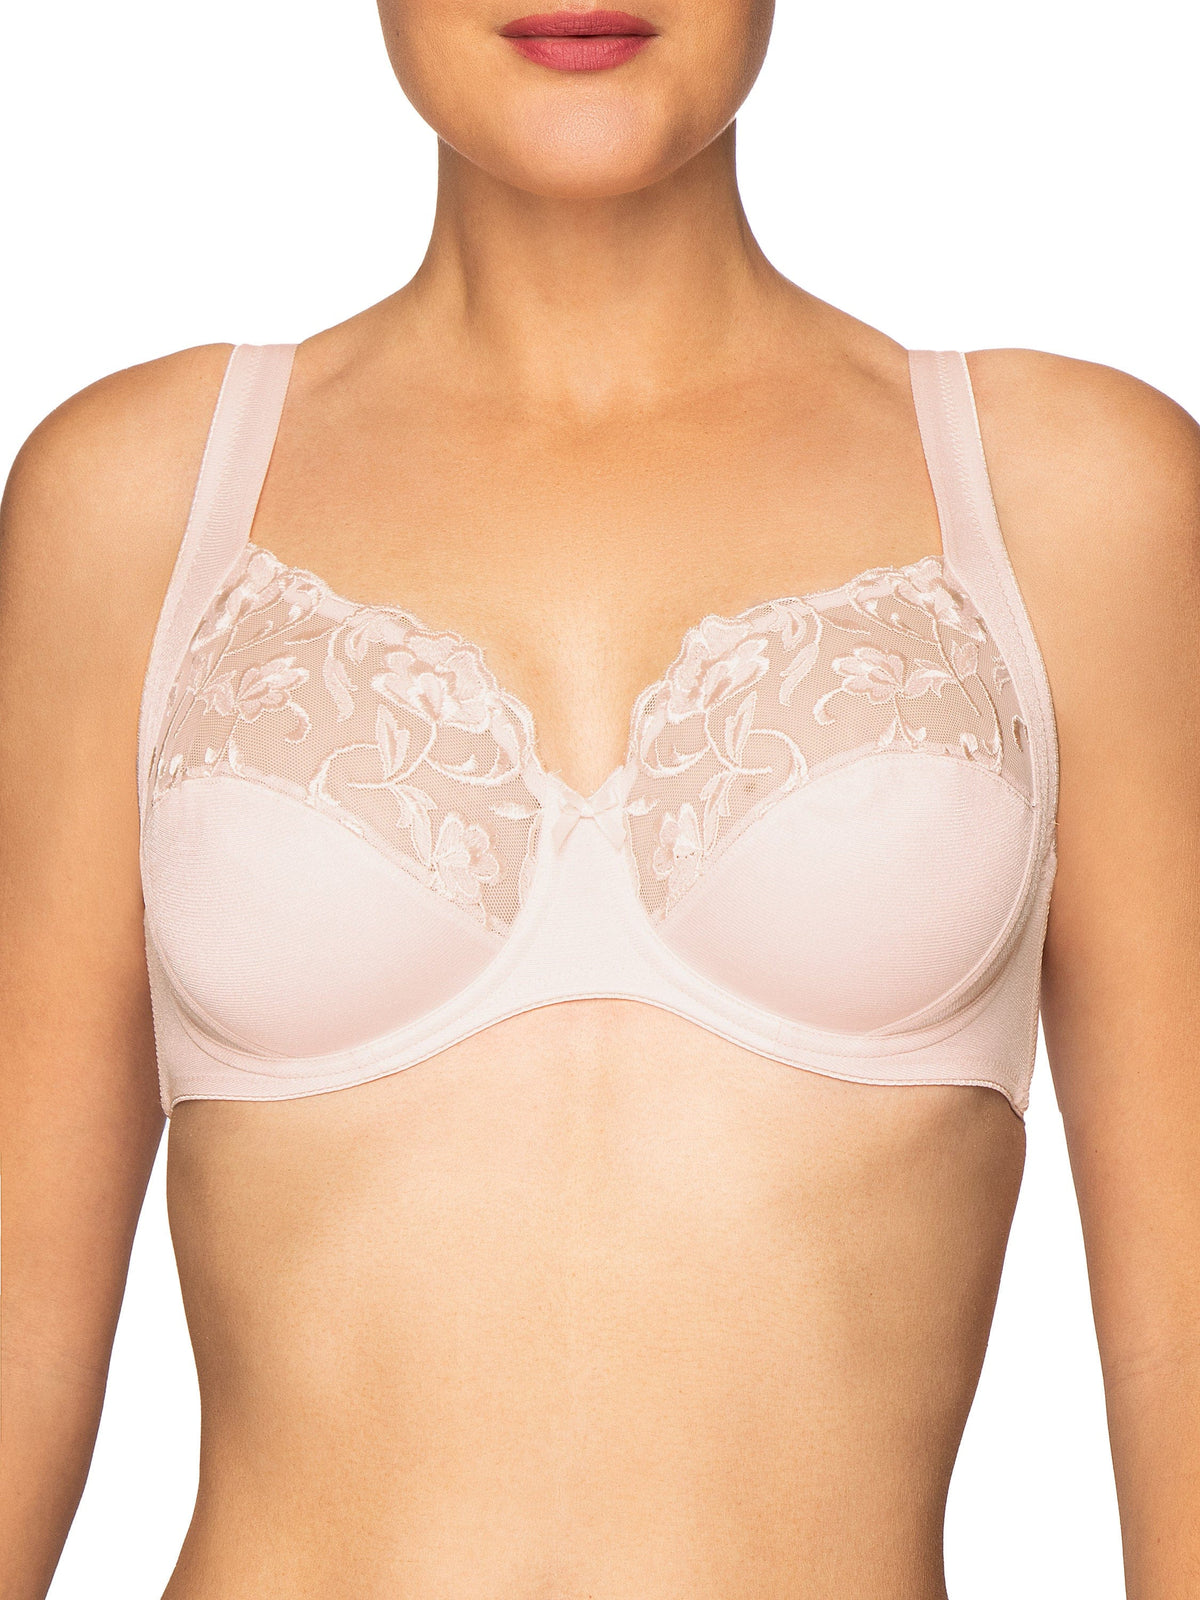 Conturelle Push Up Rose / 46 DD/E Moments Wired Bra